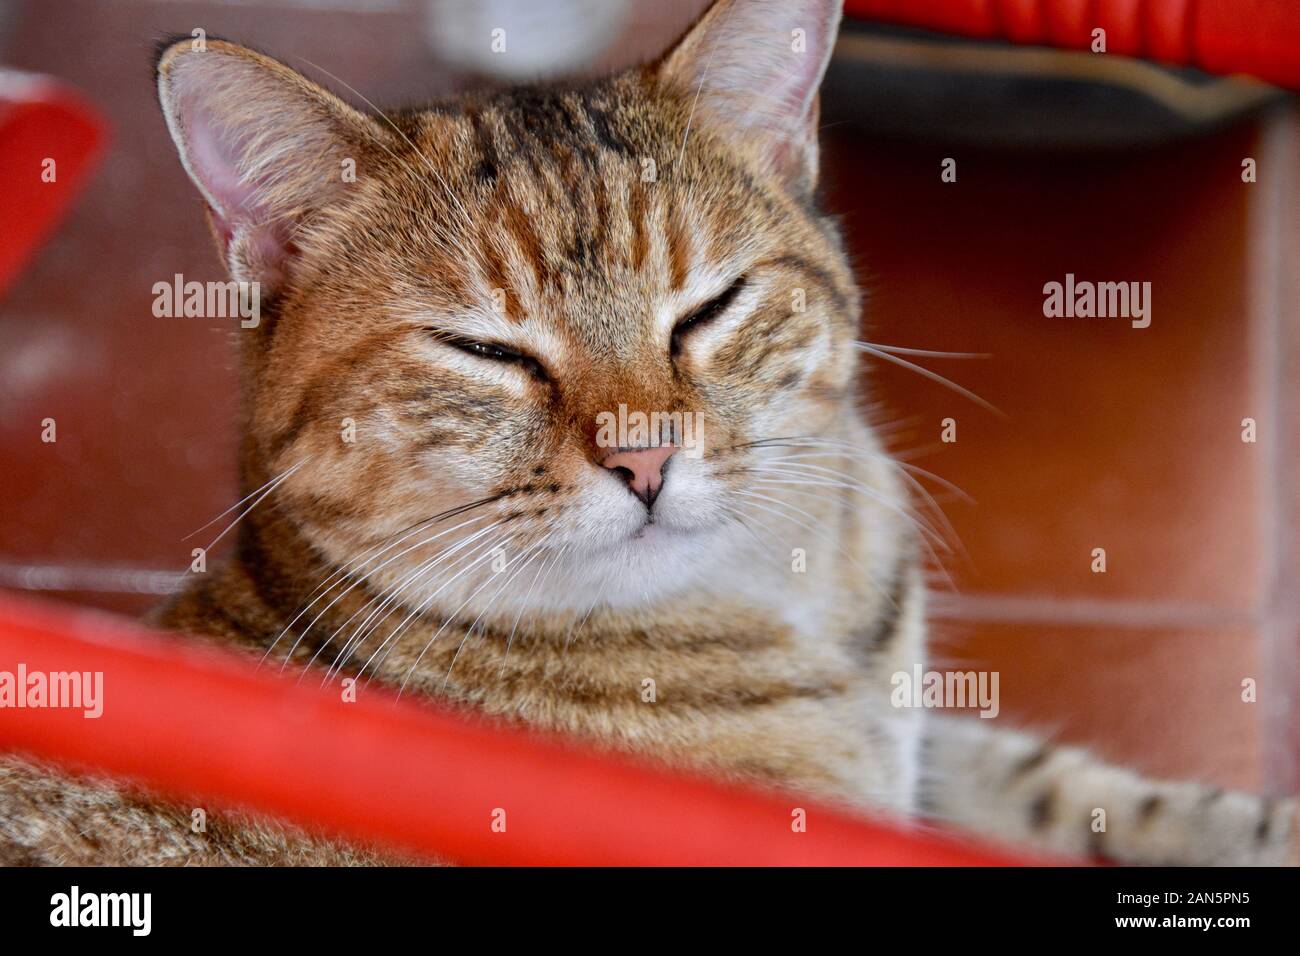 Close up of a sleepy tabby cat resting under a red rocking chair. Rincon, Puerto Rico. Stock Photo